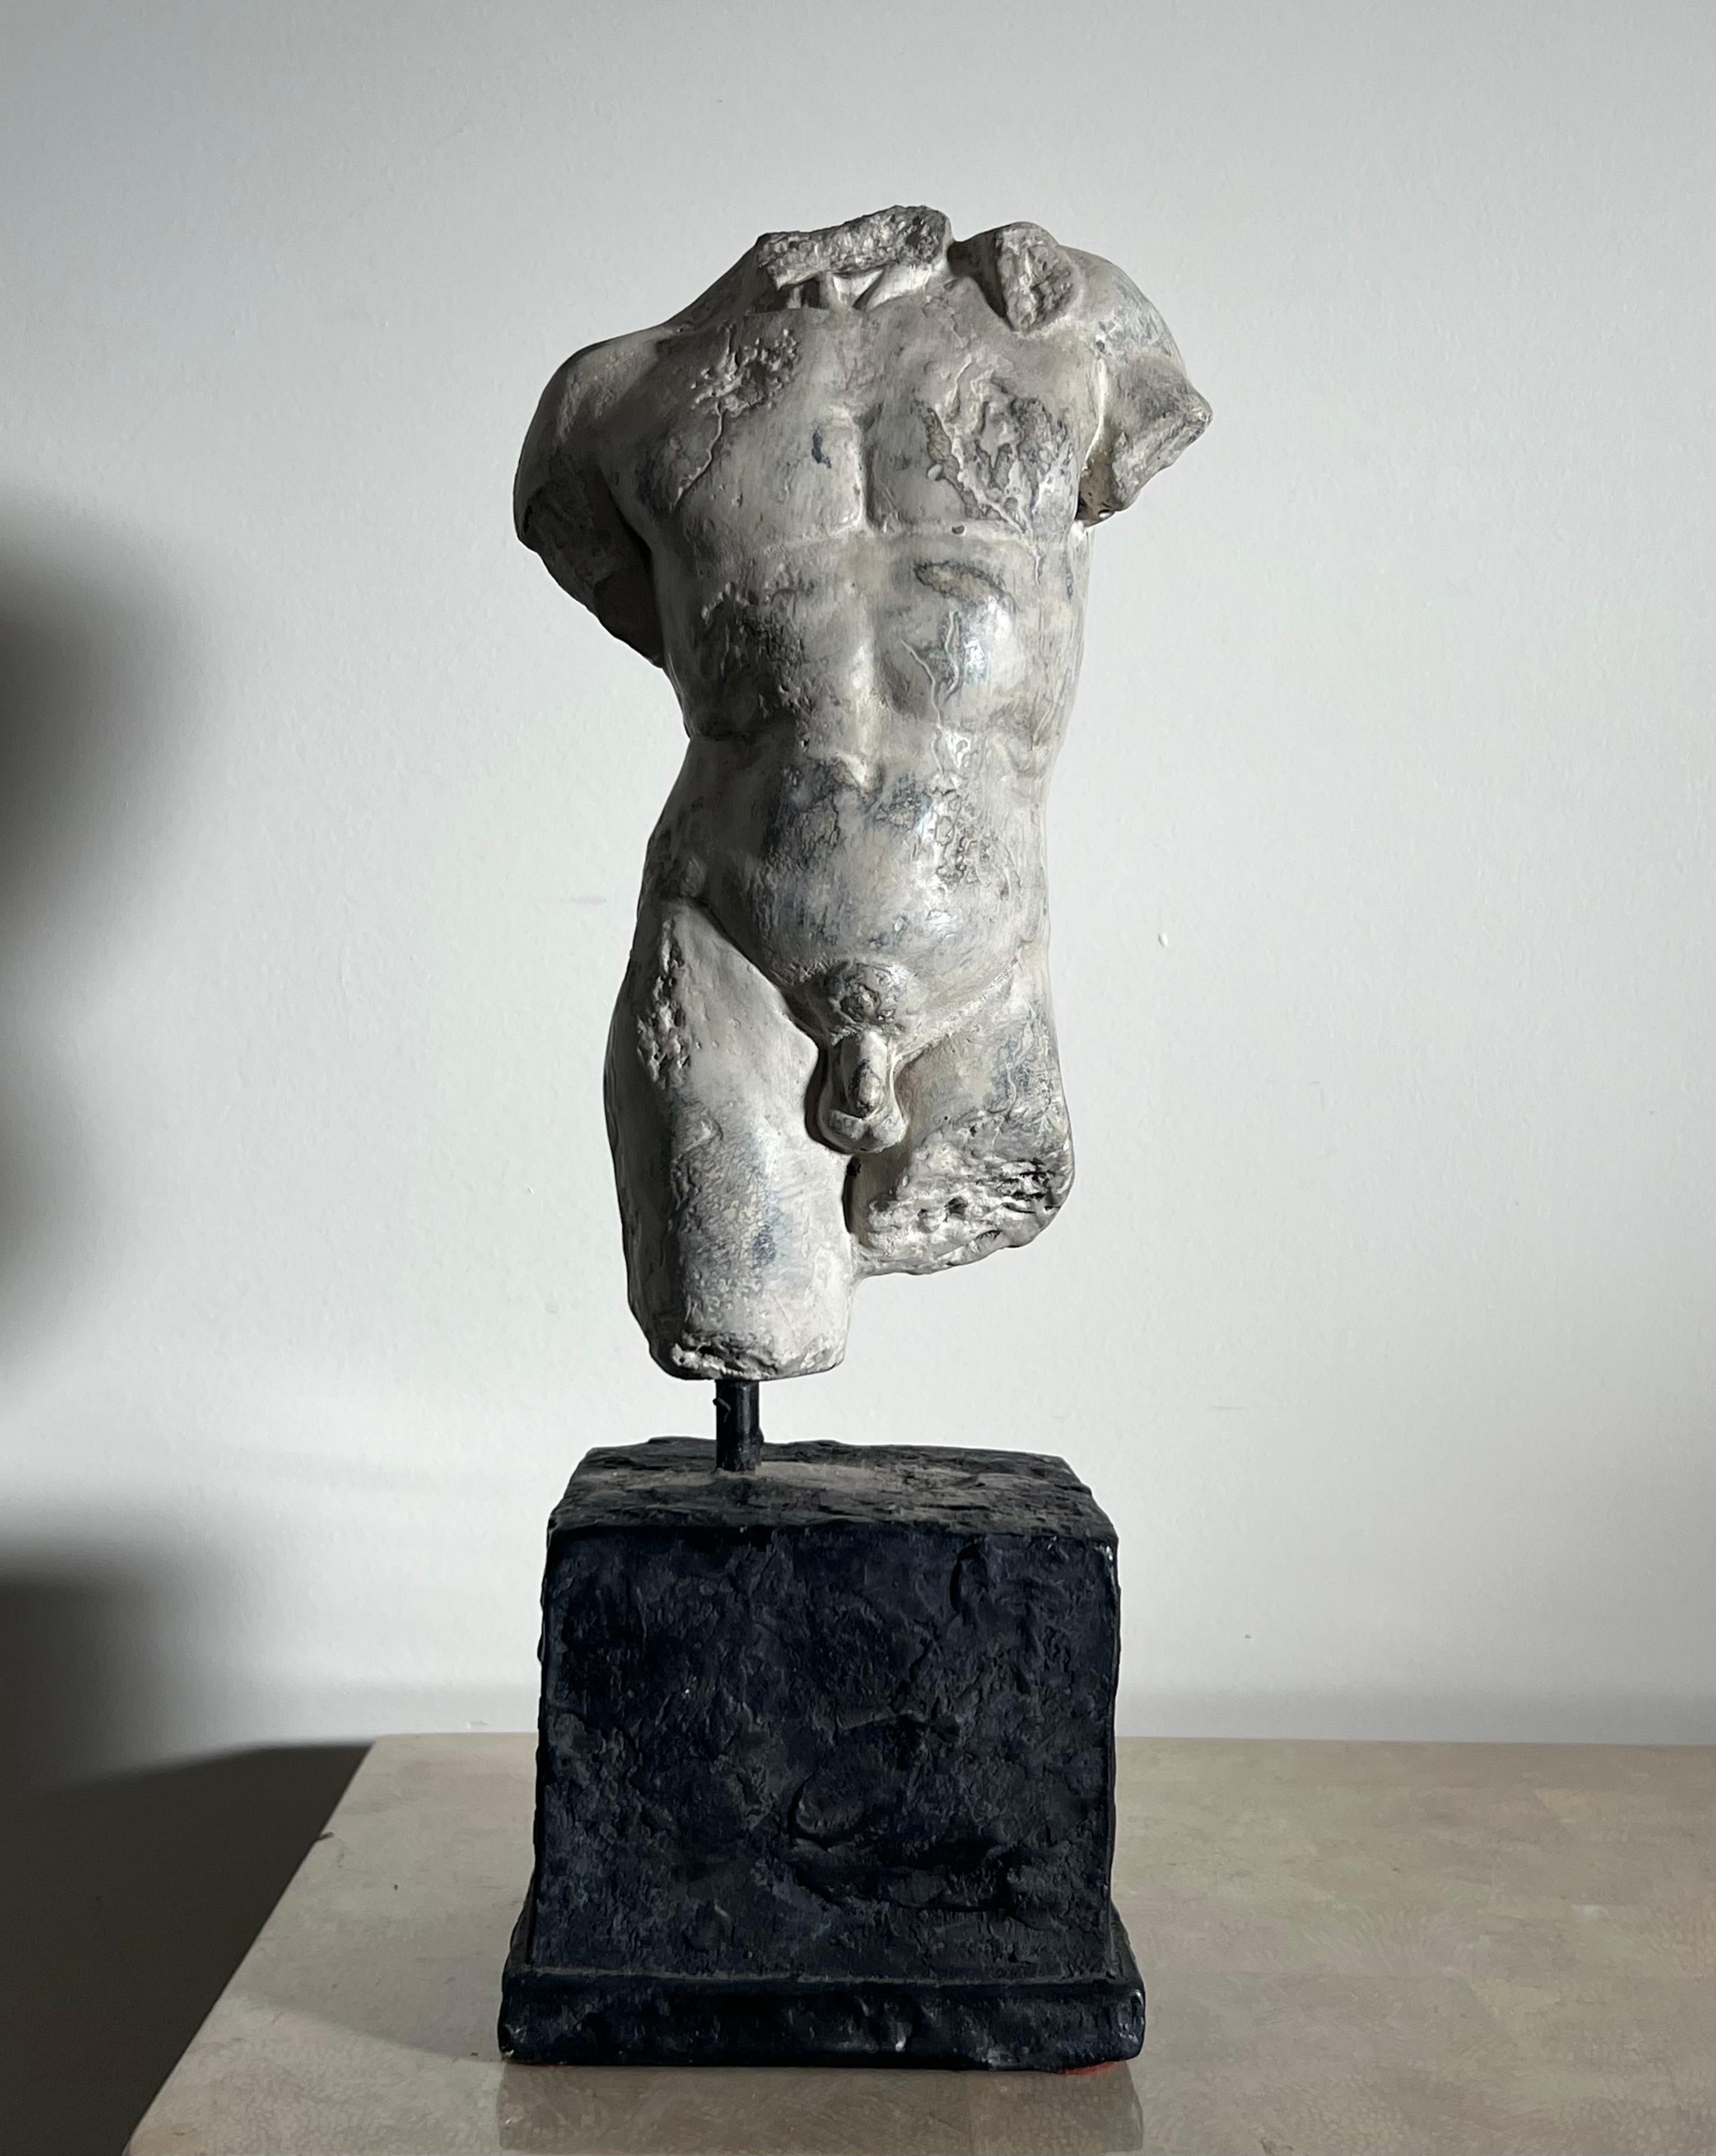 A statue of a nude male bust or torso, hand-carved of plaster, d’après Michelangelo or the Ancient Greek Hellenistic and Roman Imperial classics, late 20th century. Mounted on a plaster plinth. Dare I say rather well-endowed for the classics. No